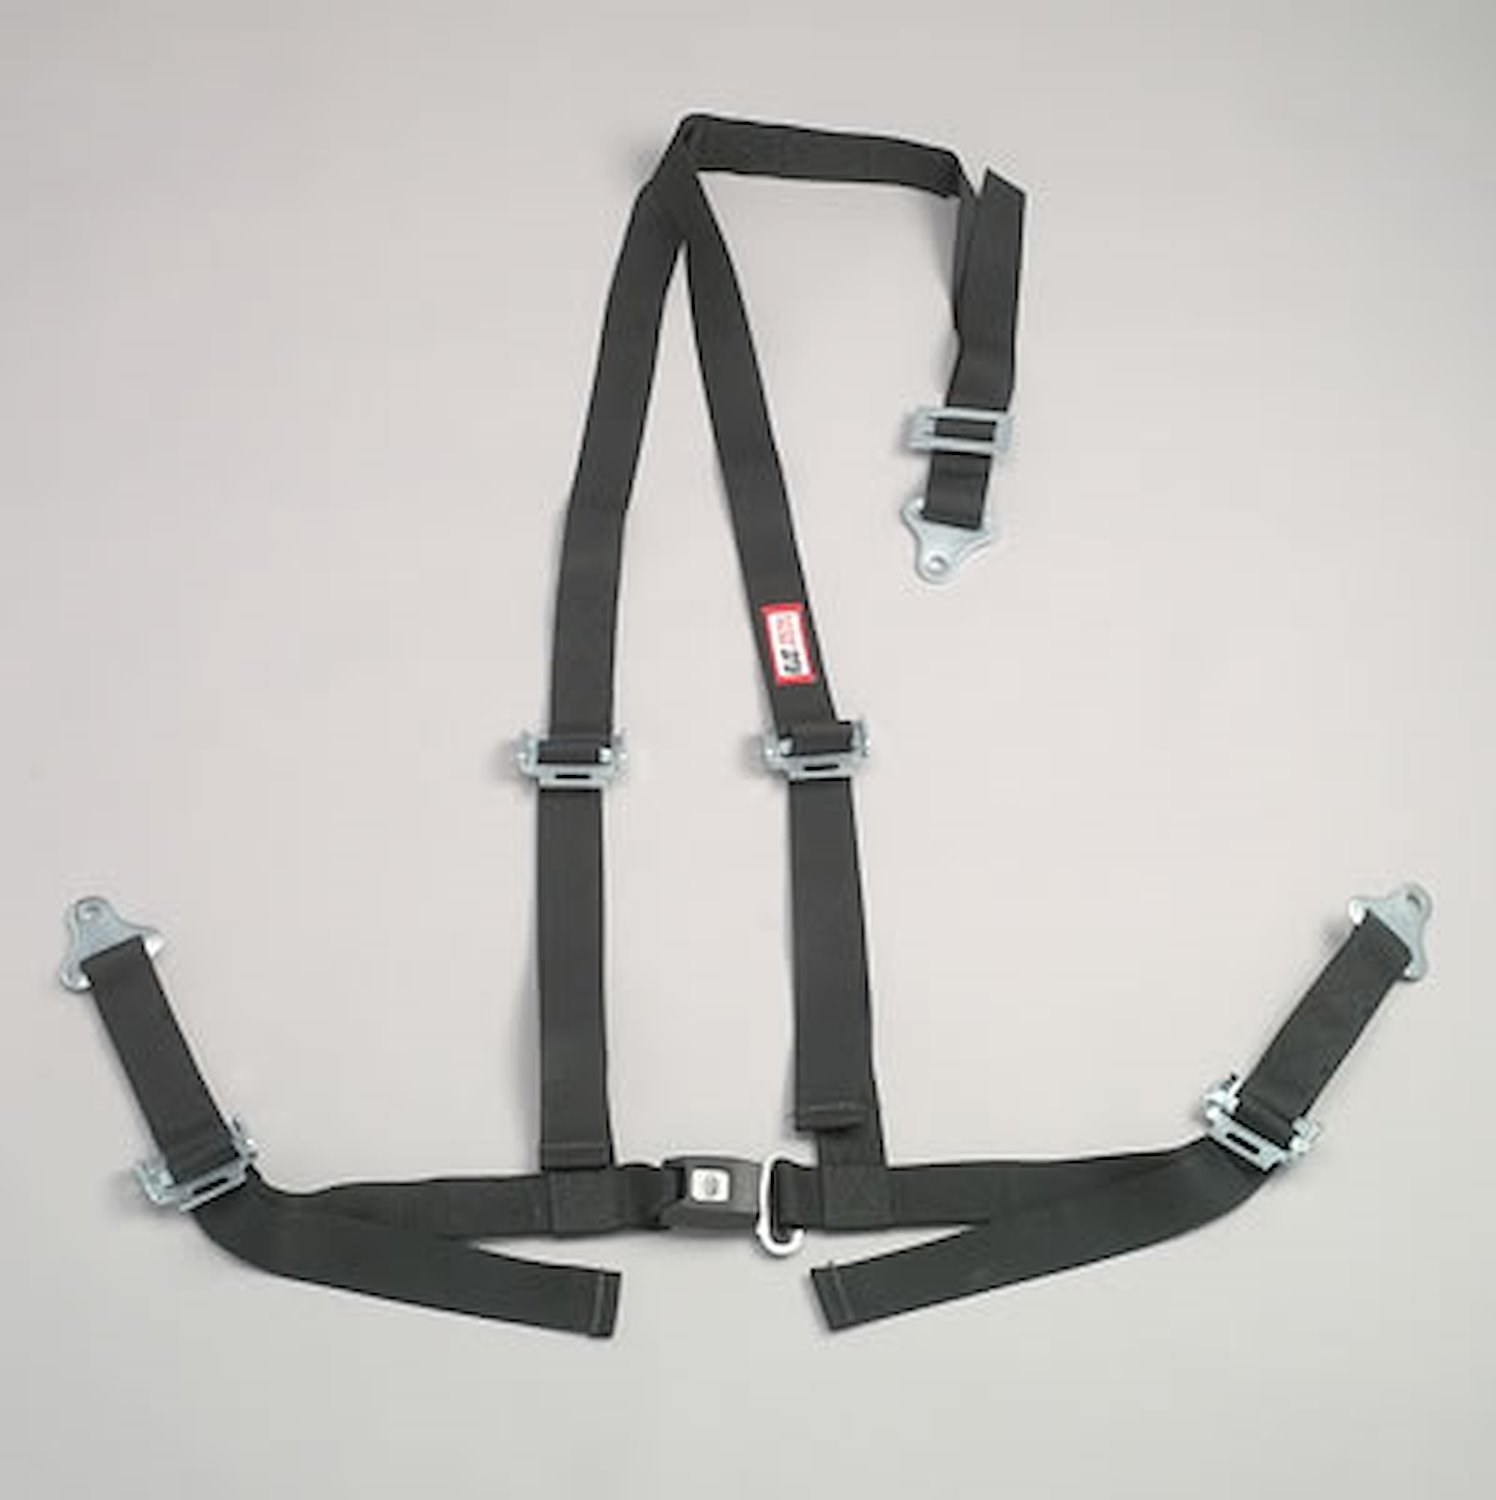 NON-SFI B&T HARNESS 2 PULL UP Lap Belt SNAP 2 S. H. Individual FLOOR Mount WRAP/BOLT w/STERNUM STRAP OD GREEN